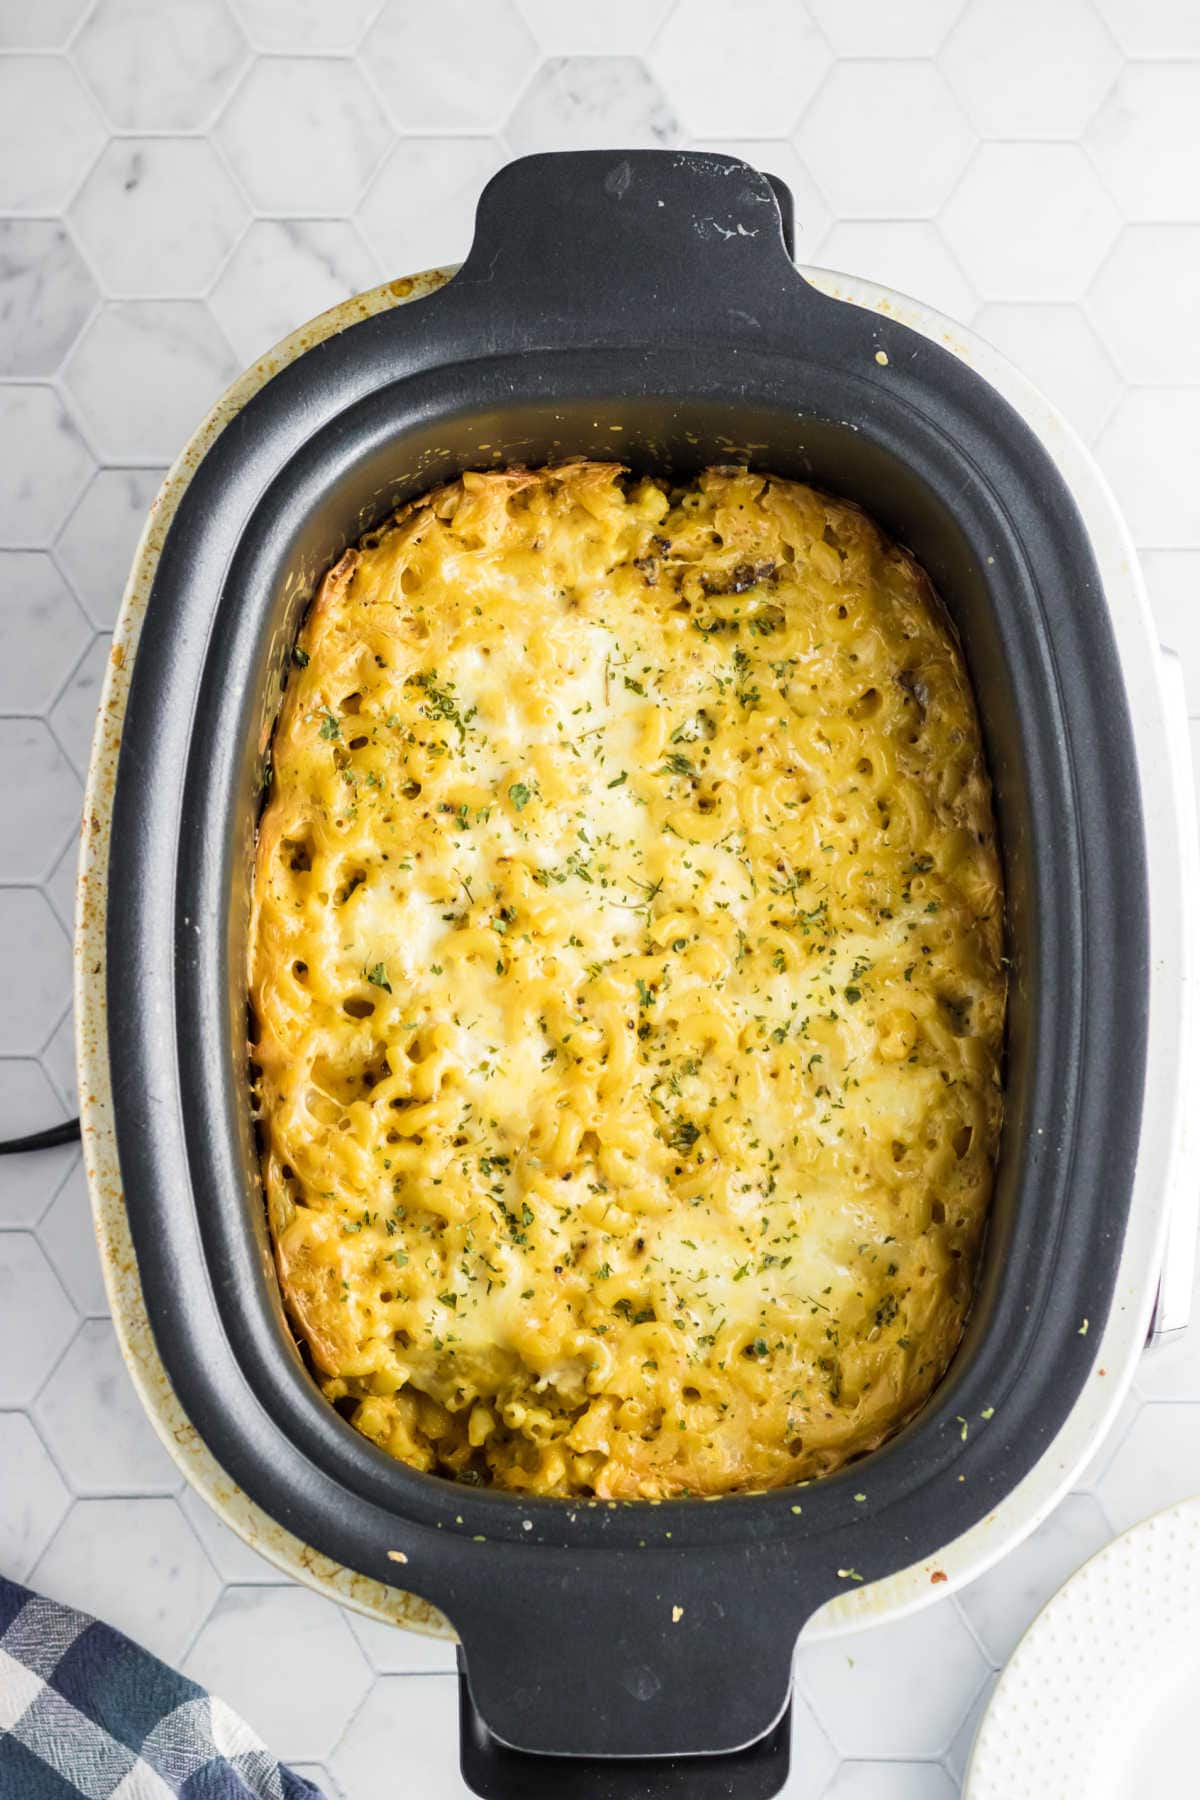 A crockpot with macaroni and cheese in it.